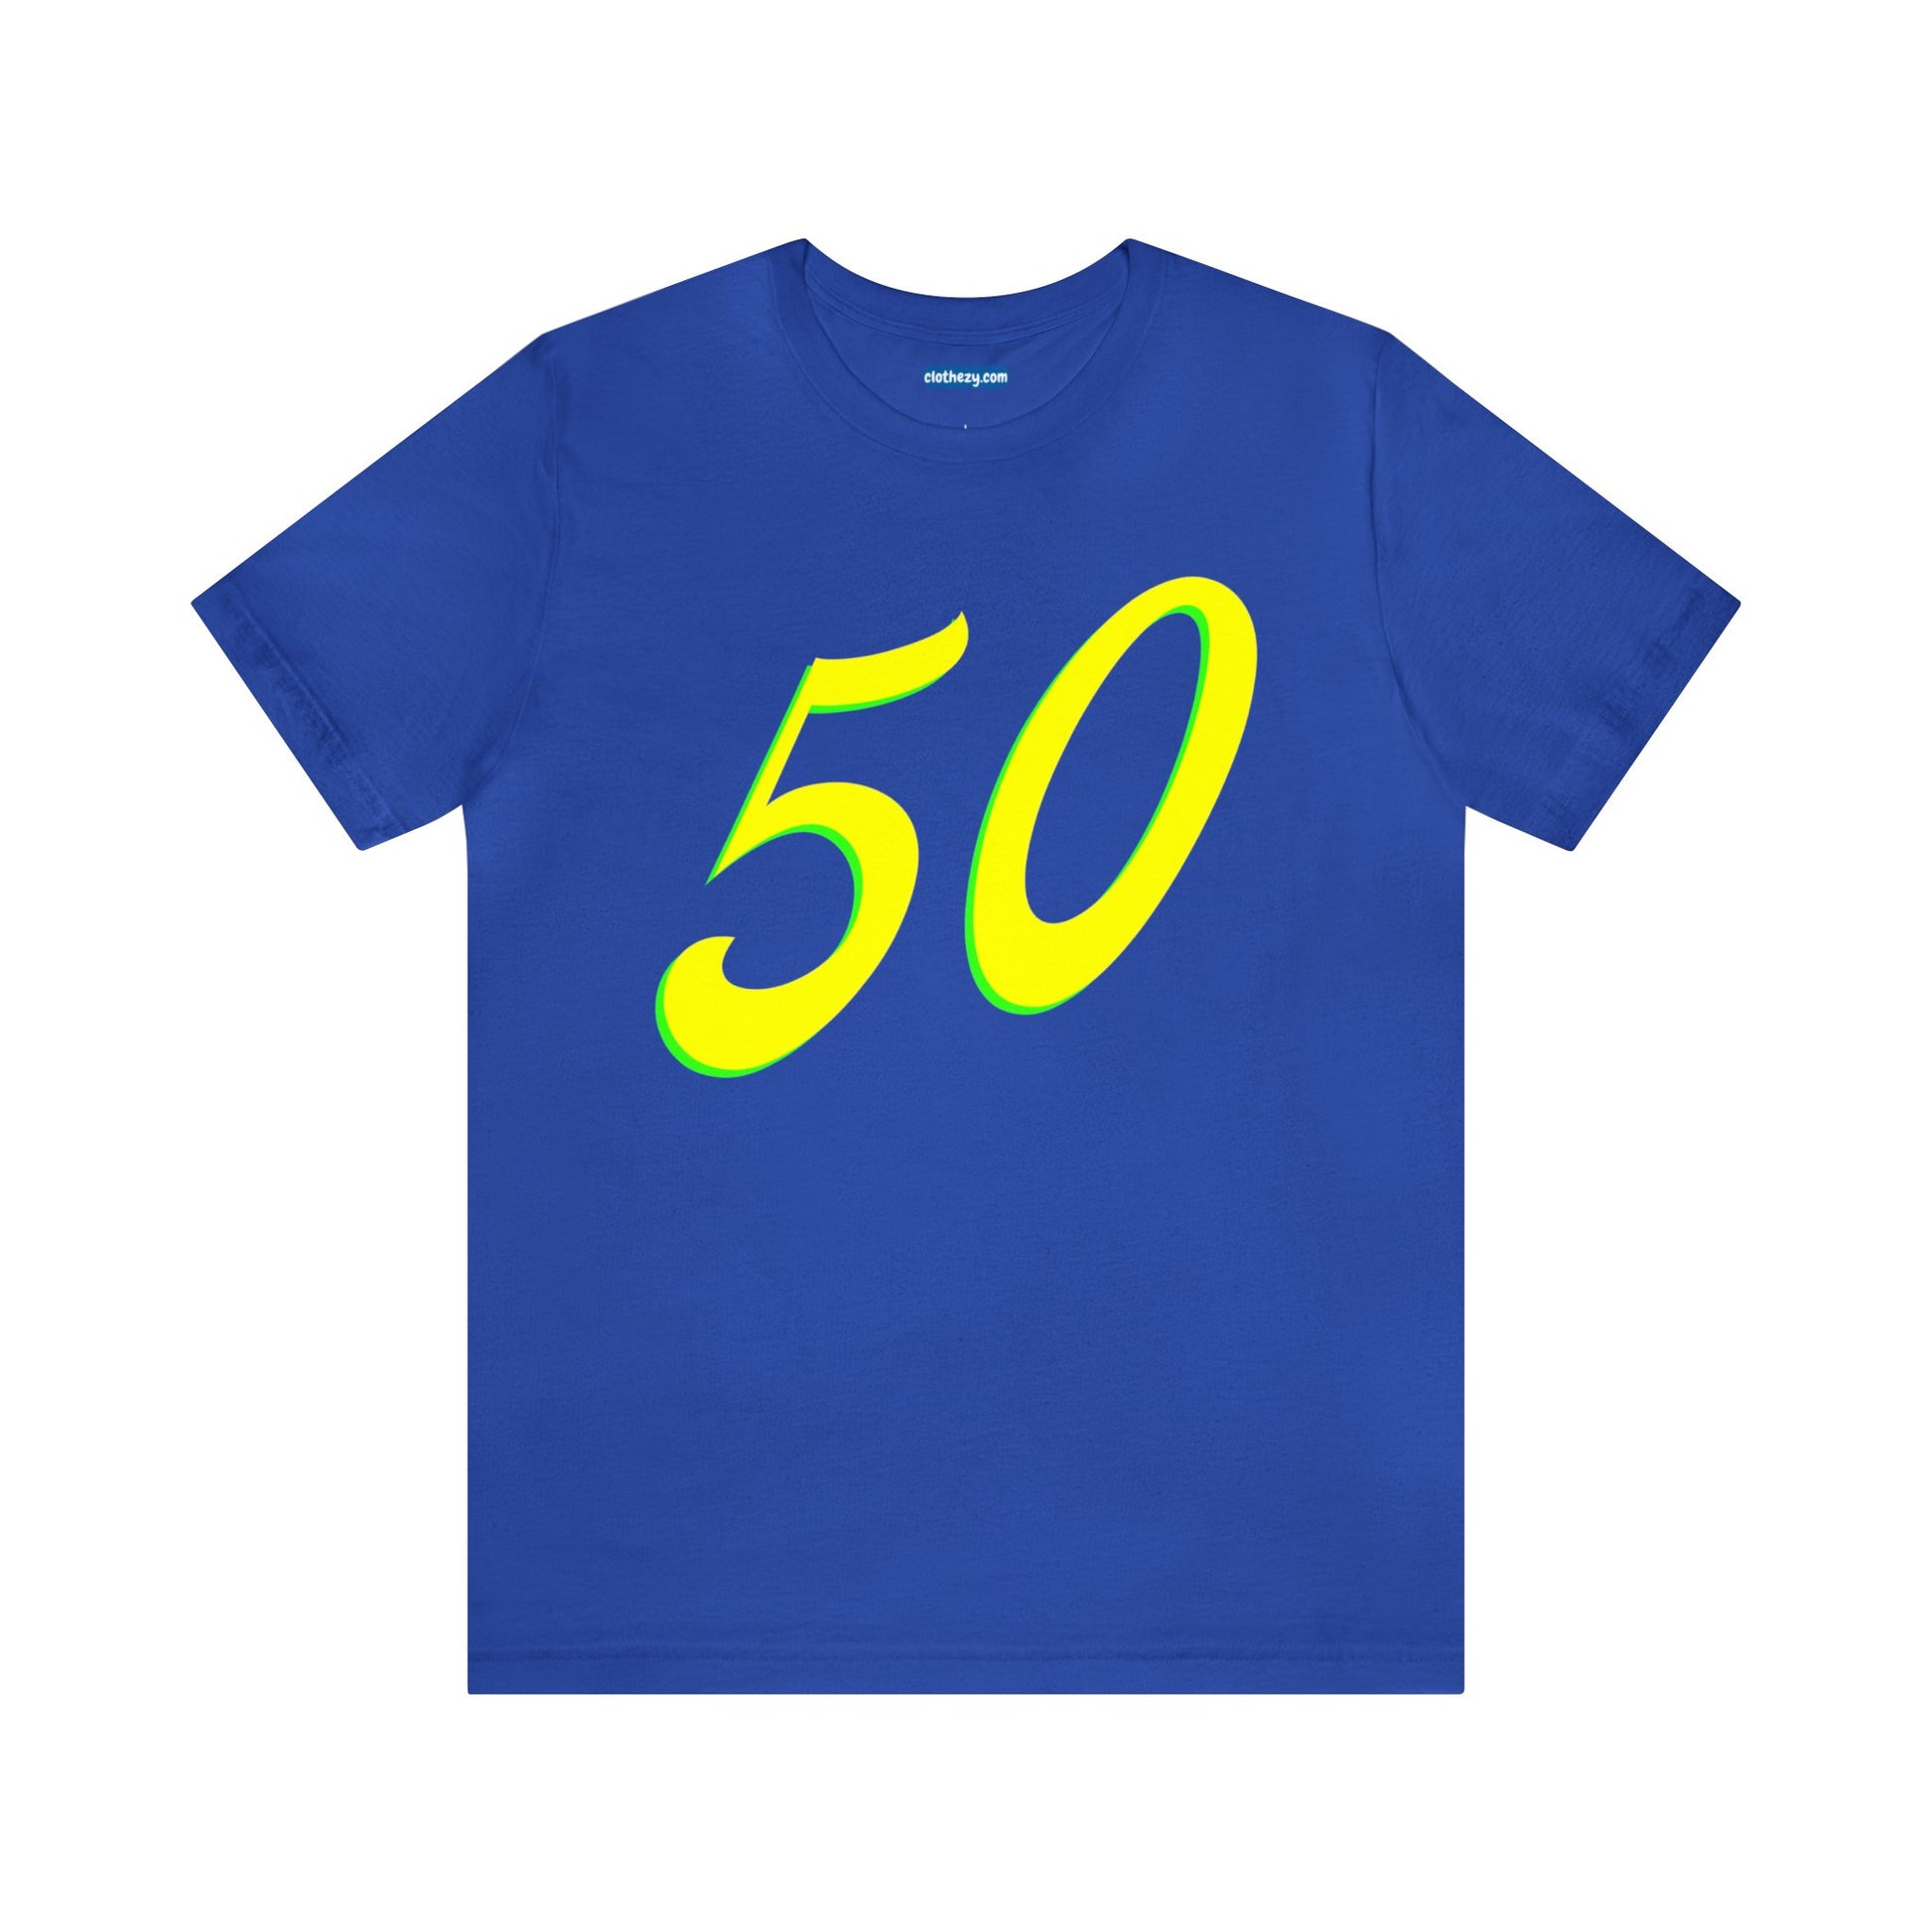 Number 50 Design - Soft Cotton Tee for birthdays and celebrations, Gift for friends and family, Multiple Options by clothezy.com in Royal Blue Size Small - Buy Now